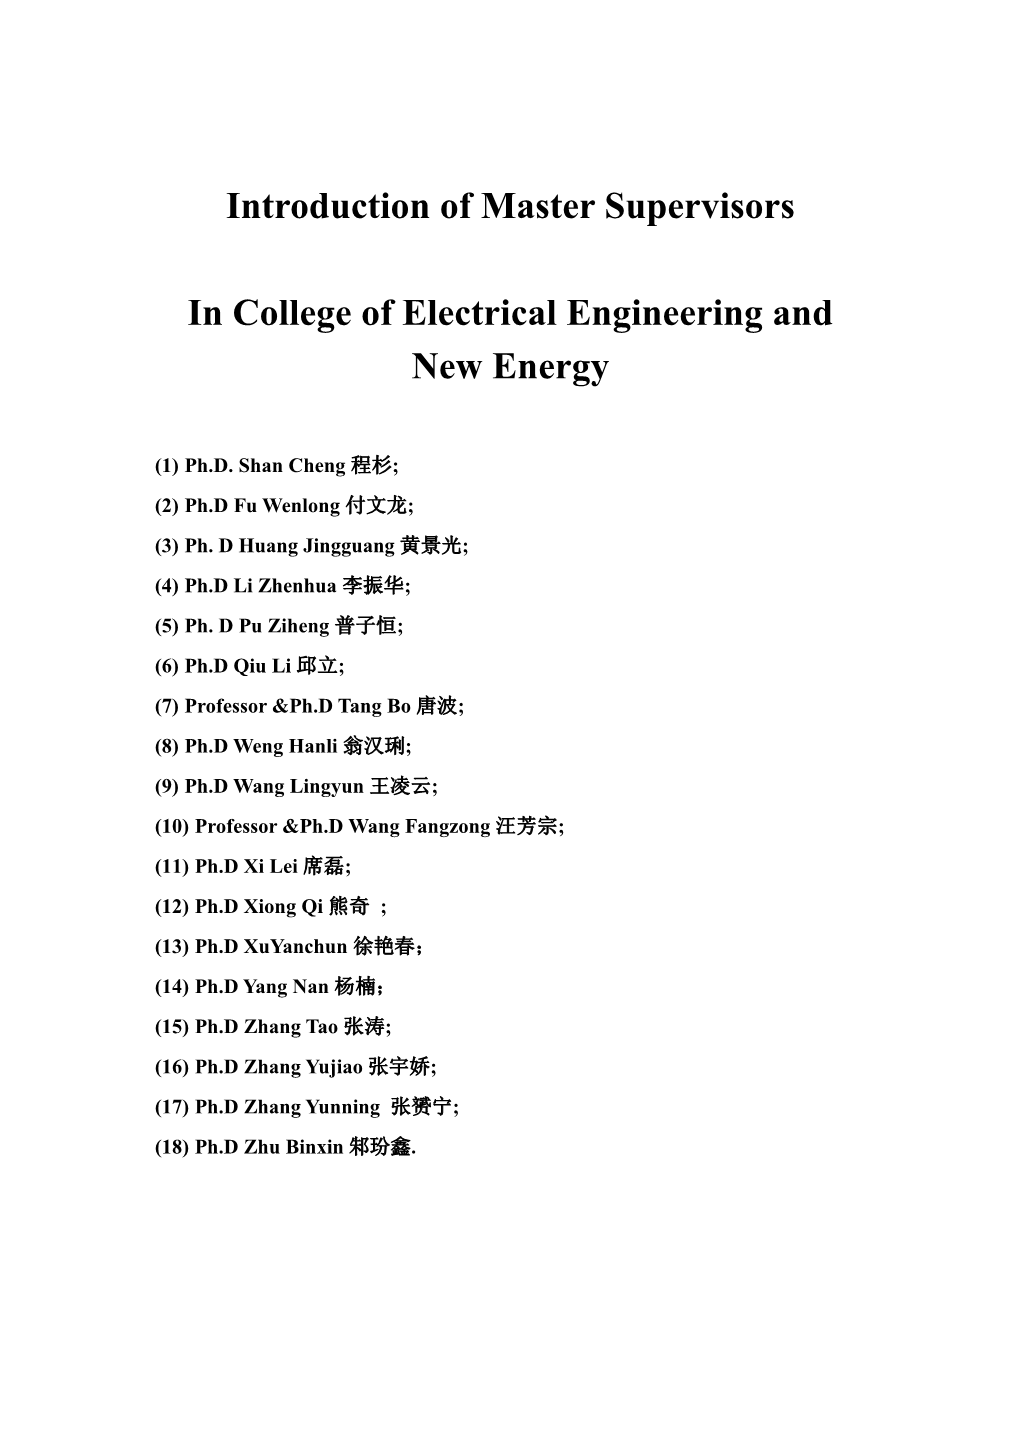 Introduction of Master Supervisors in College of Electrical Engineering